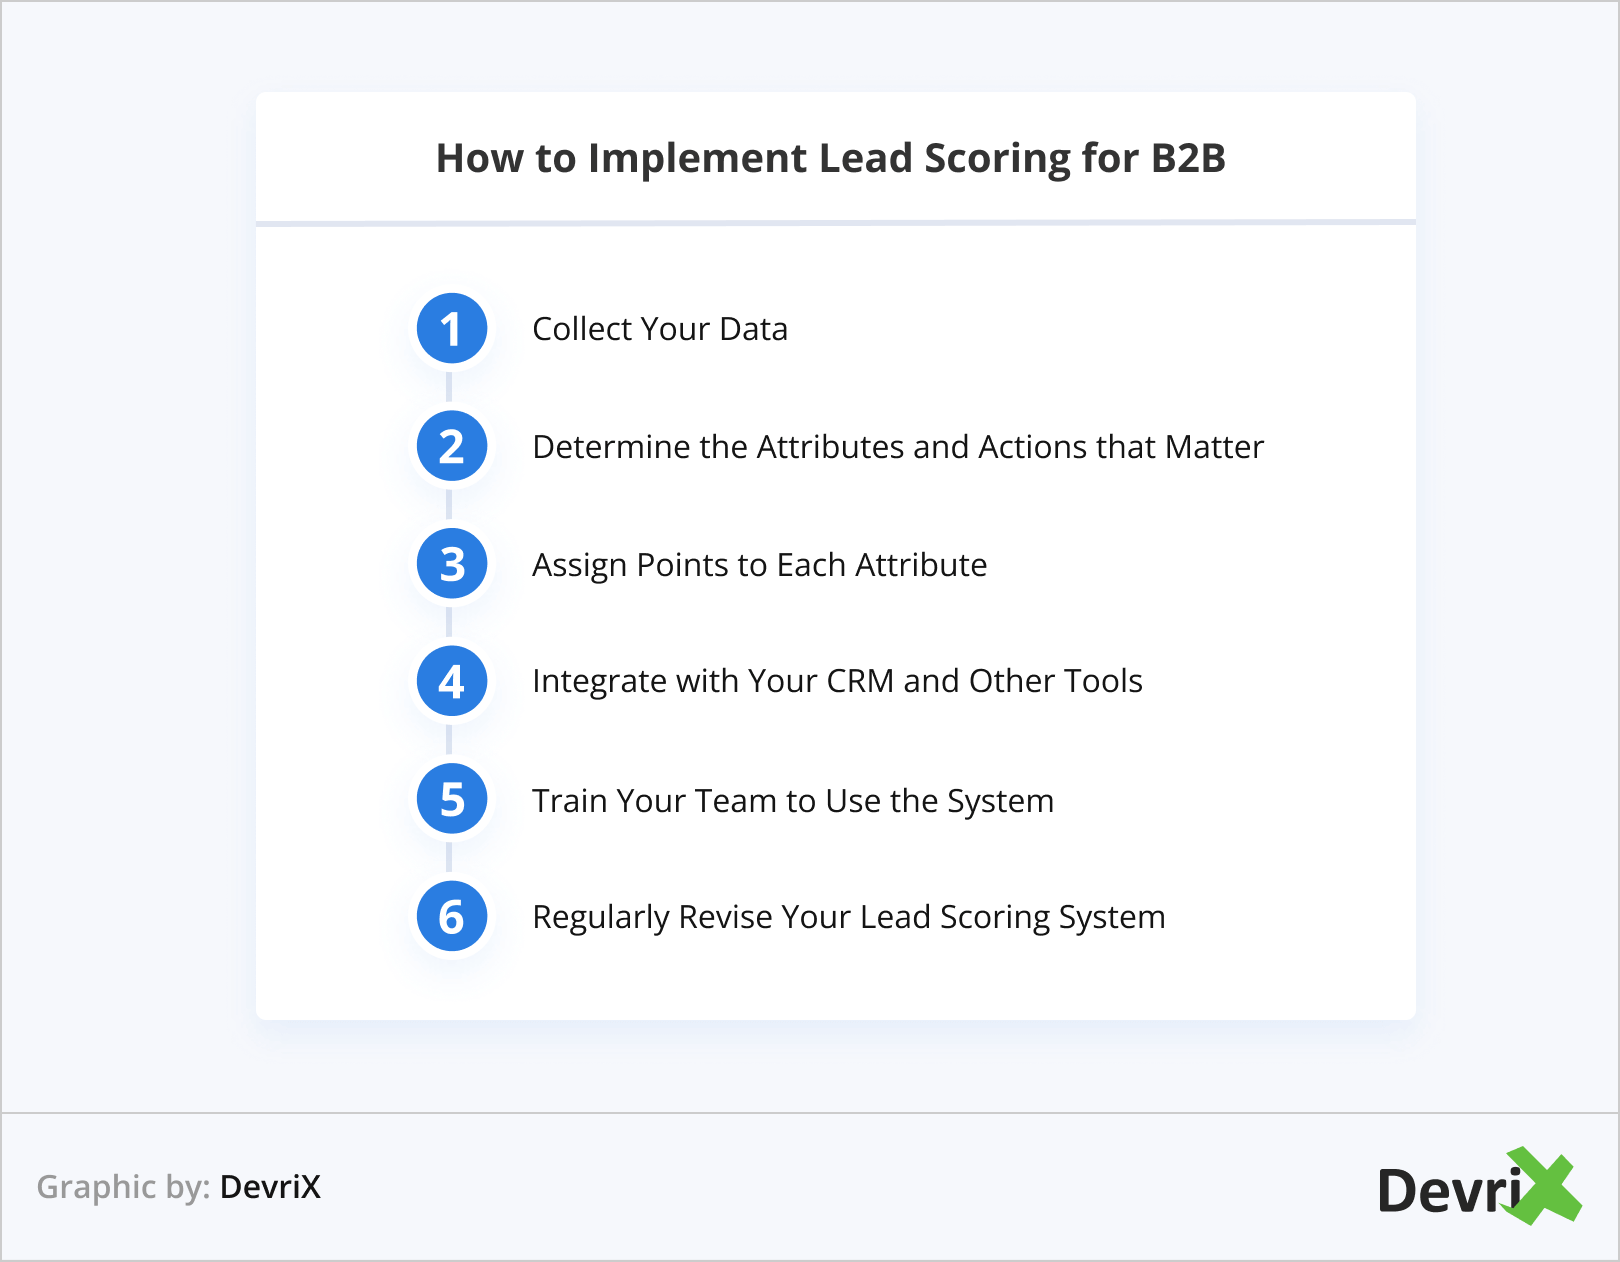 How to Implement Lead Scoring for B2B